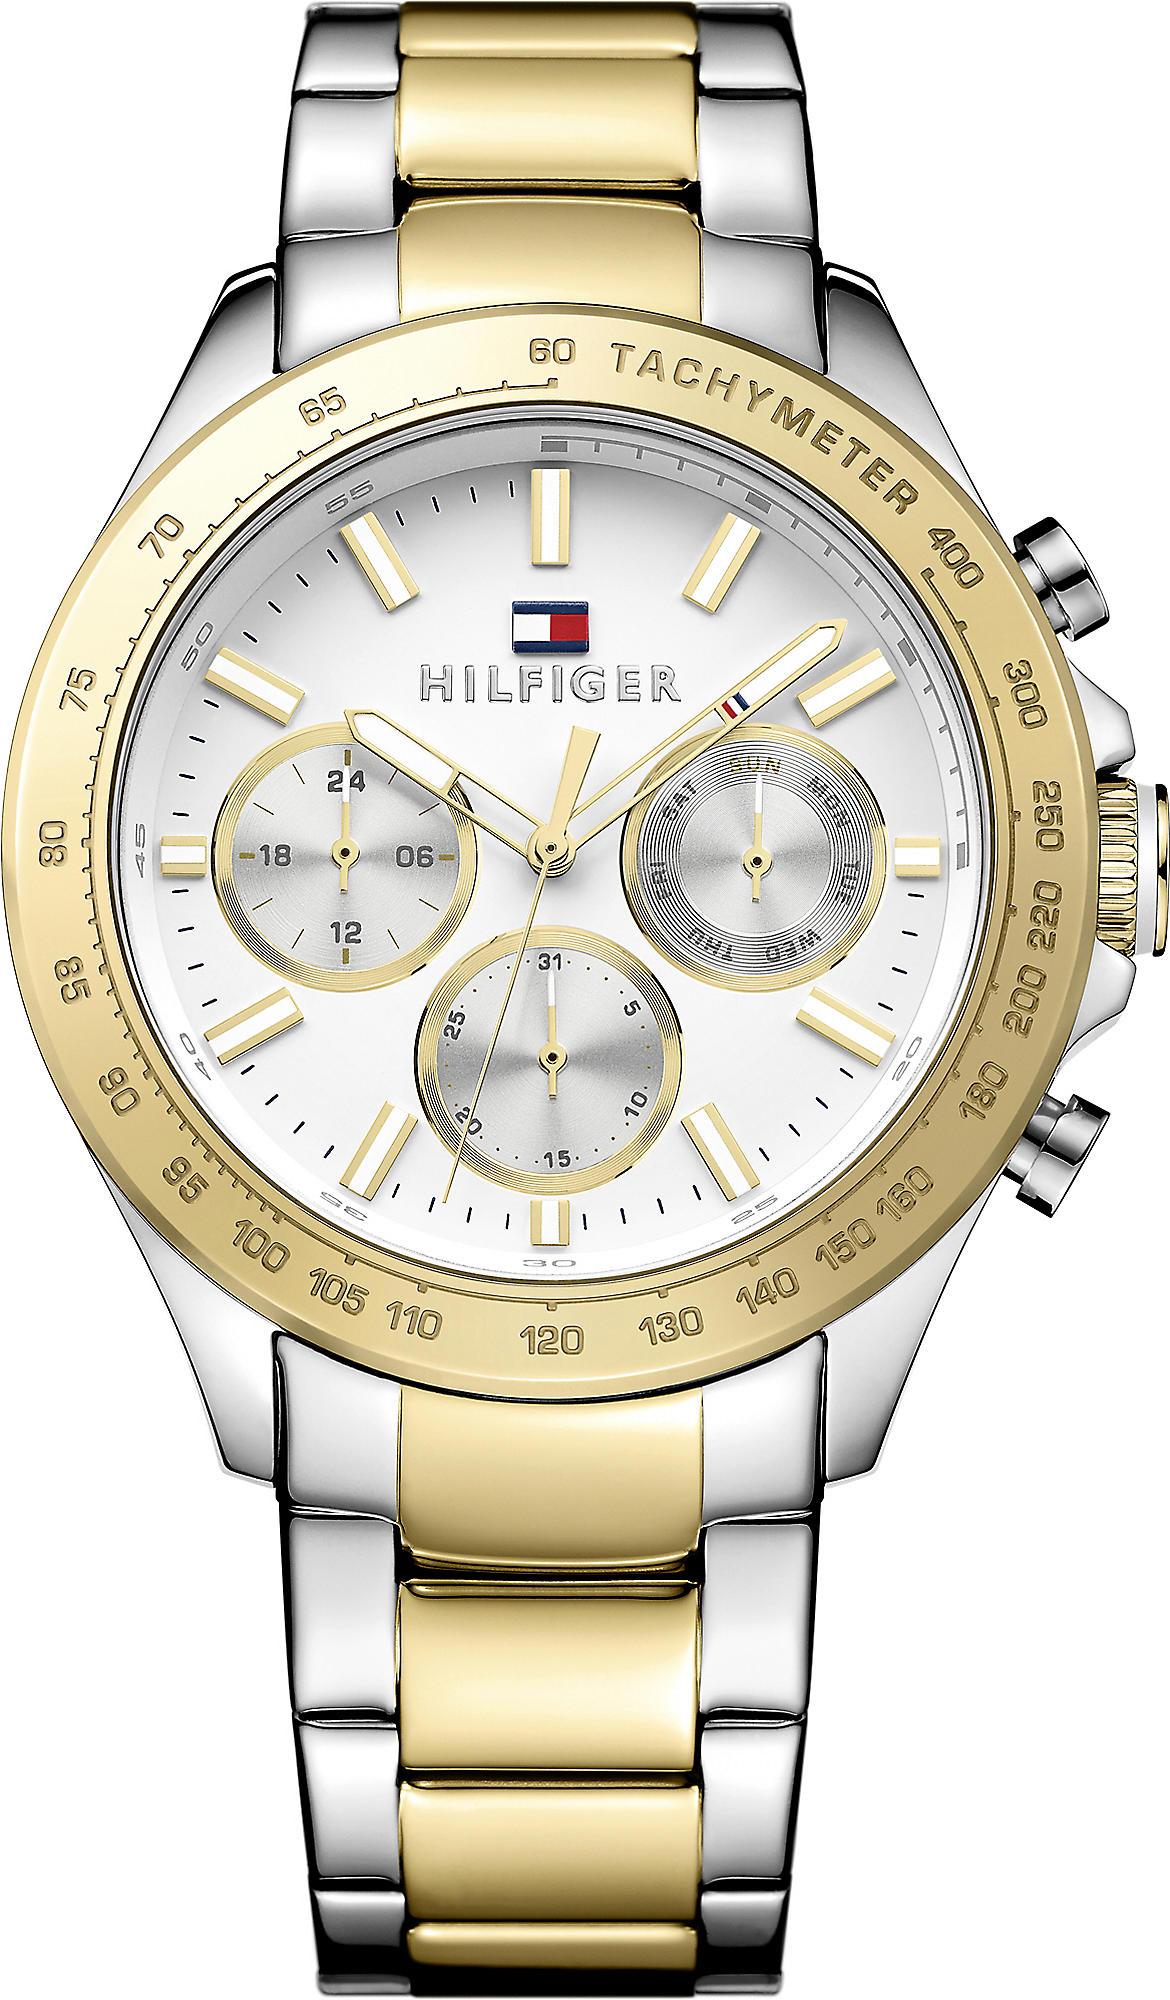 Tommy Hilfiger 1791226 Stainless Steel Watch in White (Metallic) for Tommy Hilfiger Watch Stainless Steel